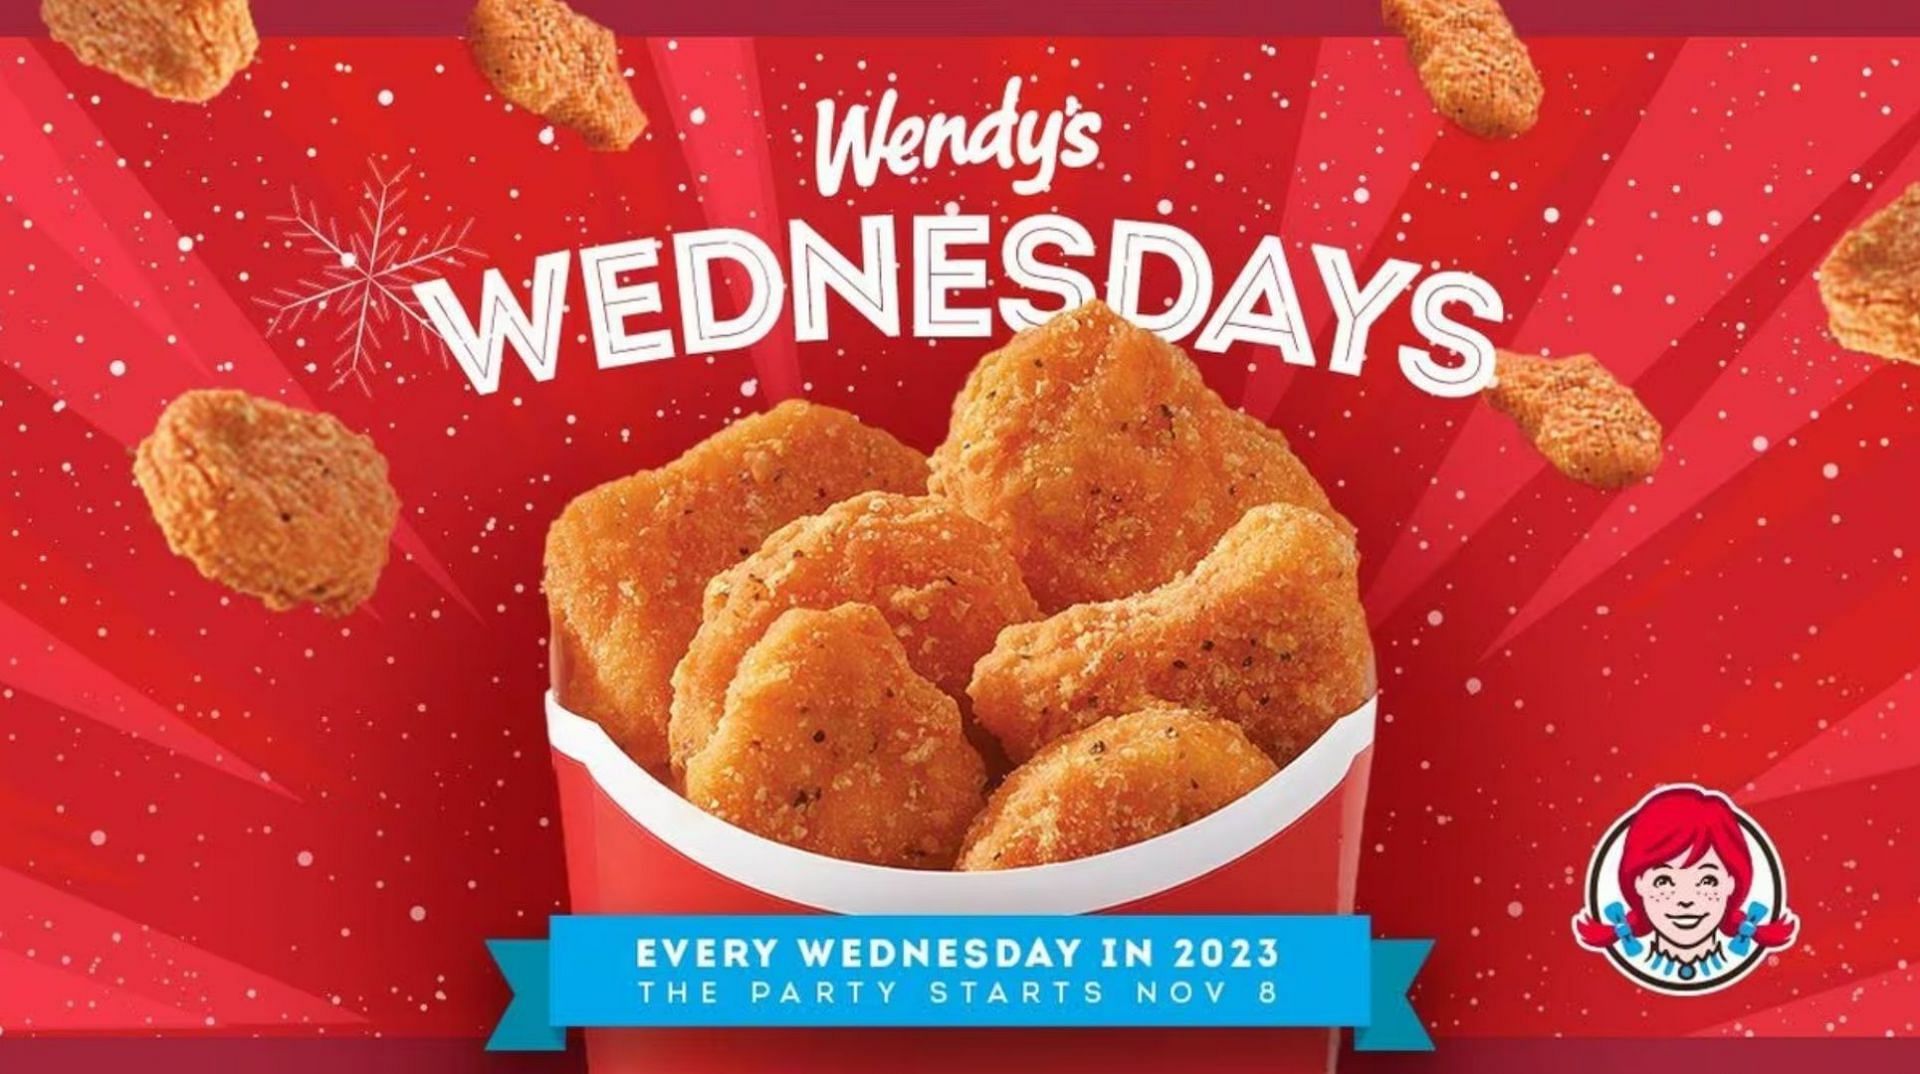 Fans can get the free six-piece Chicken Nuggets through the redeemable deal with a minimum purchase of $1 or more (Image via Wendy&rsquo;s)